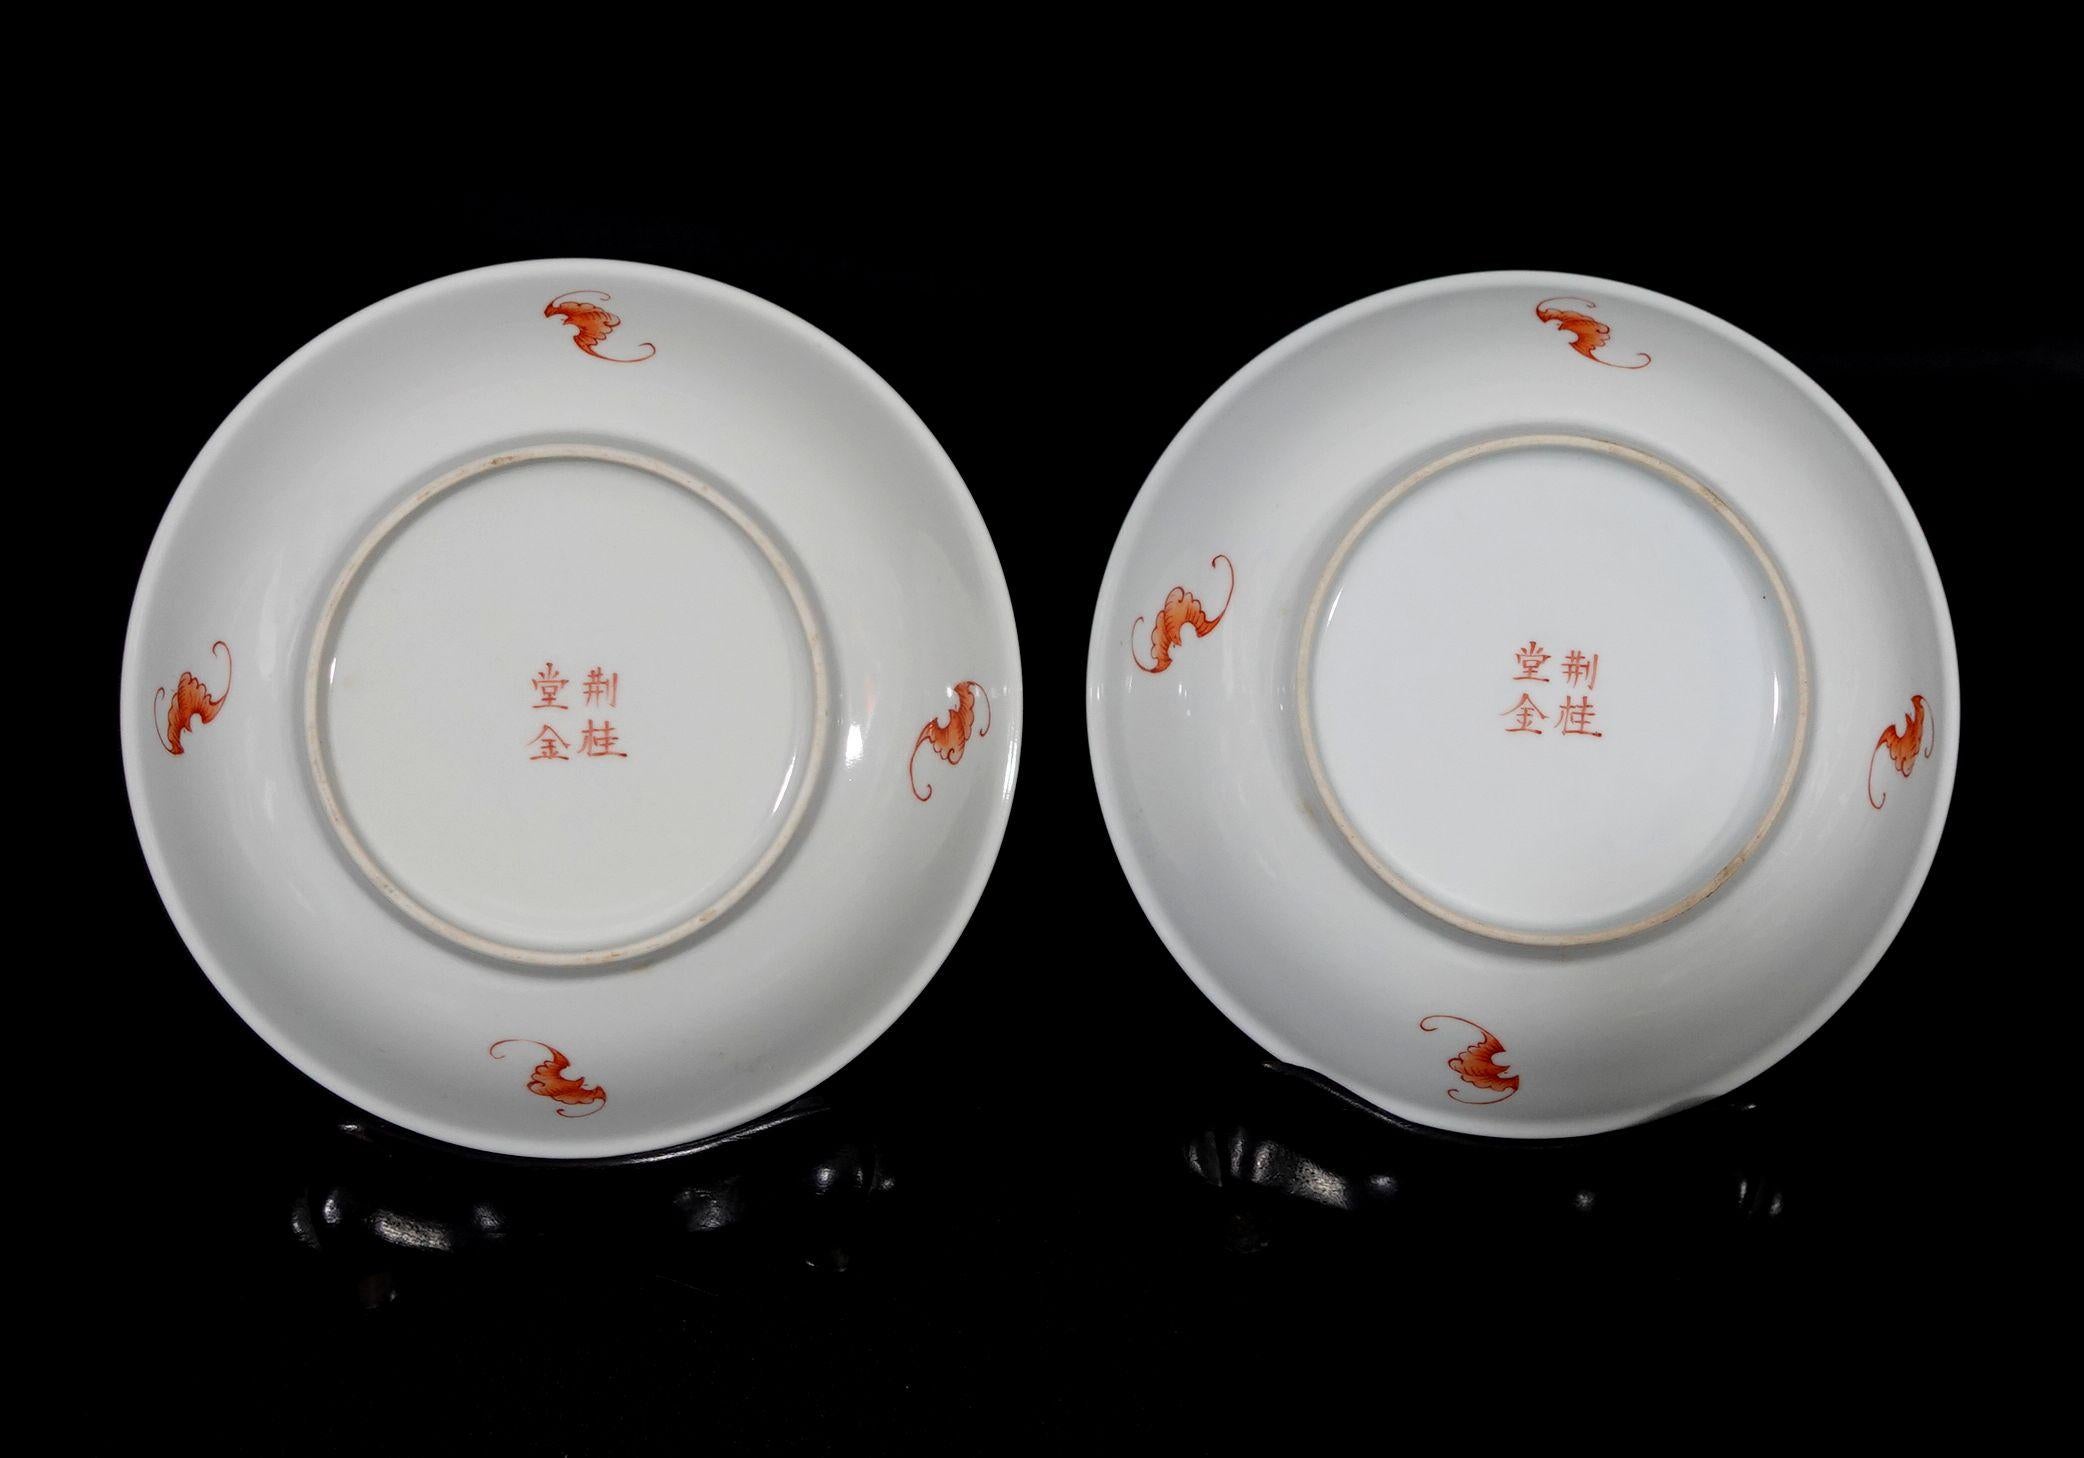 Antique Pair of Famille Rose Plates on Wood Stands Marked (荊桂堂金), 19th Century For Sale 2